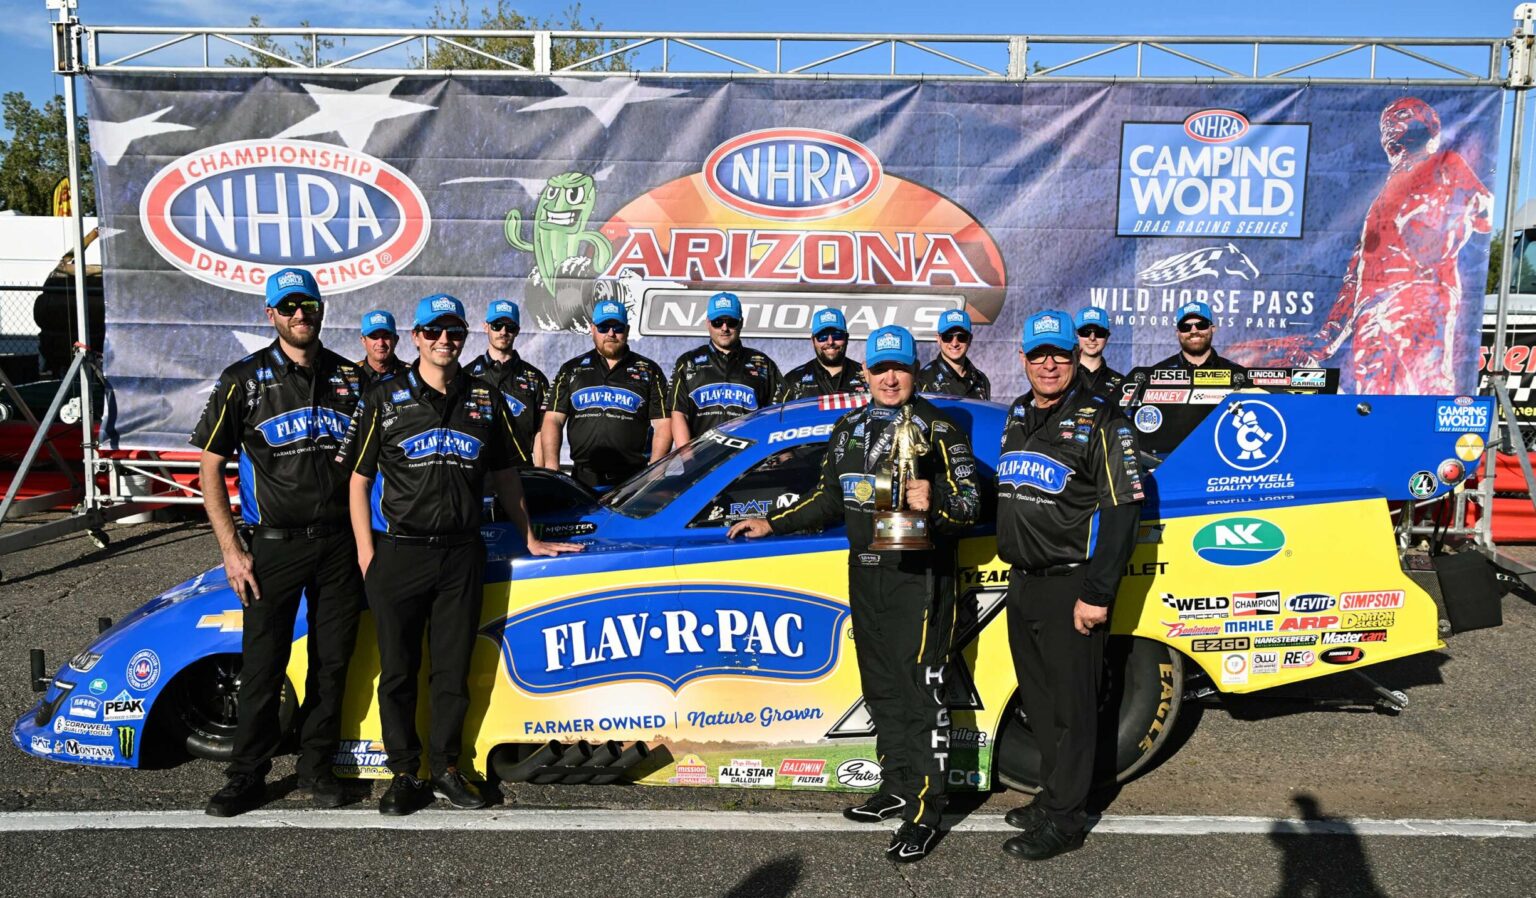 ROBERT HIGHT AND FLAV-R-PAC TAKE POINTS LEAD WITH FIRST WIN TOGETHER AT NHRA ARIZONA NATIONALS